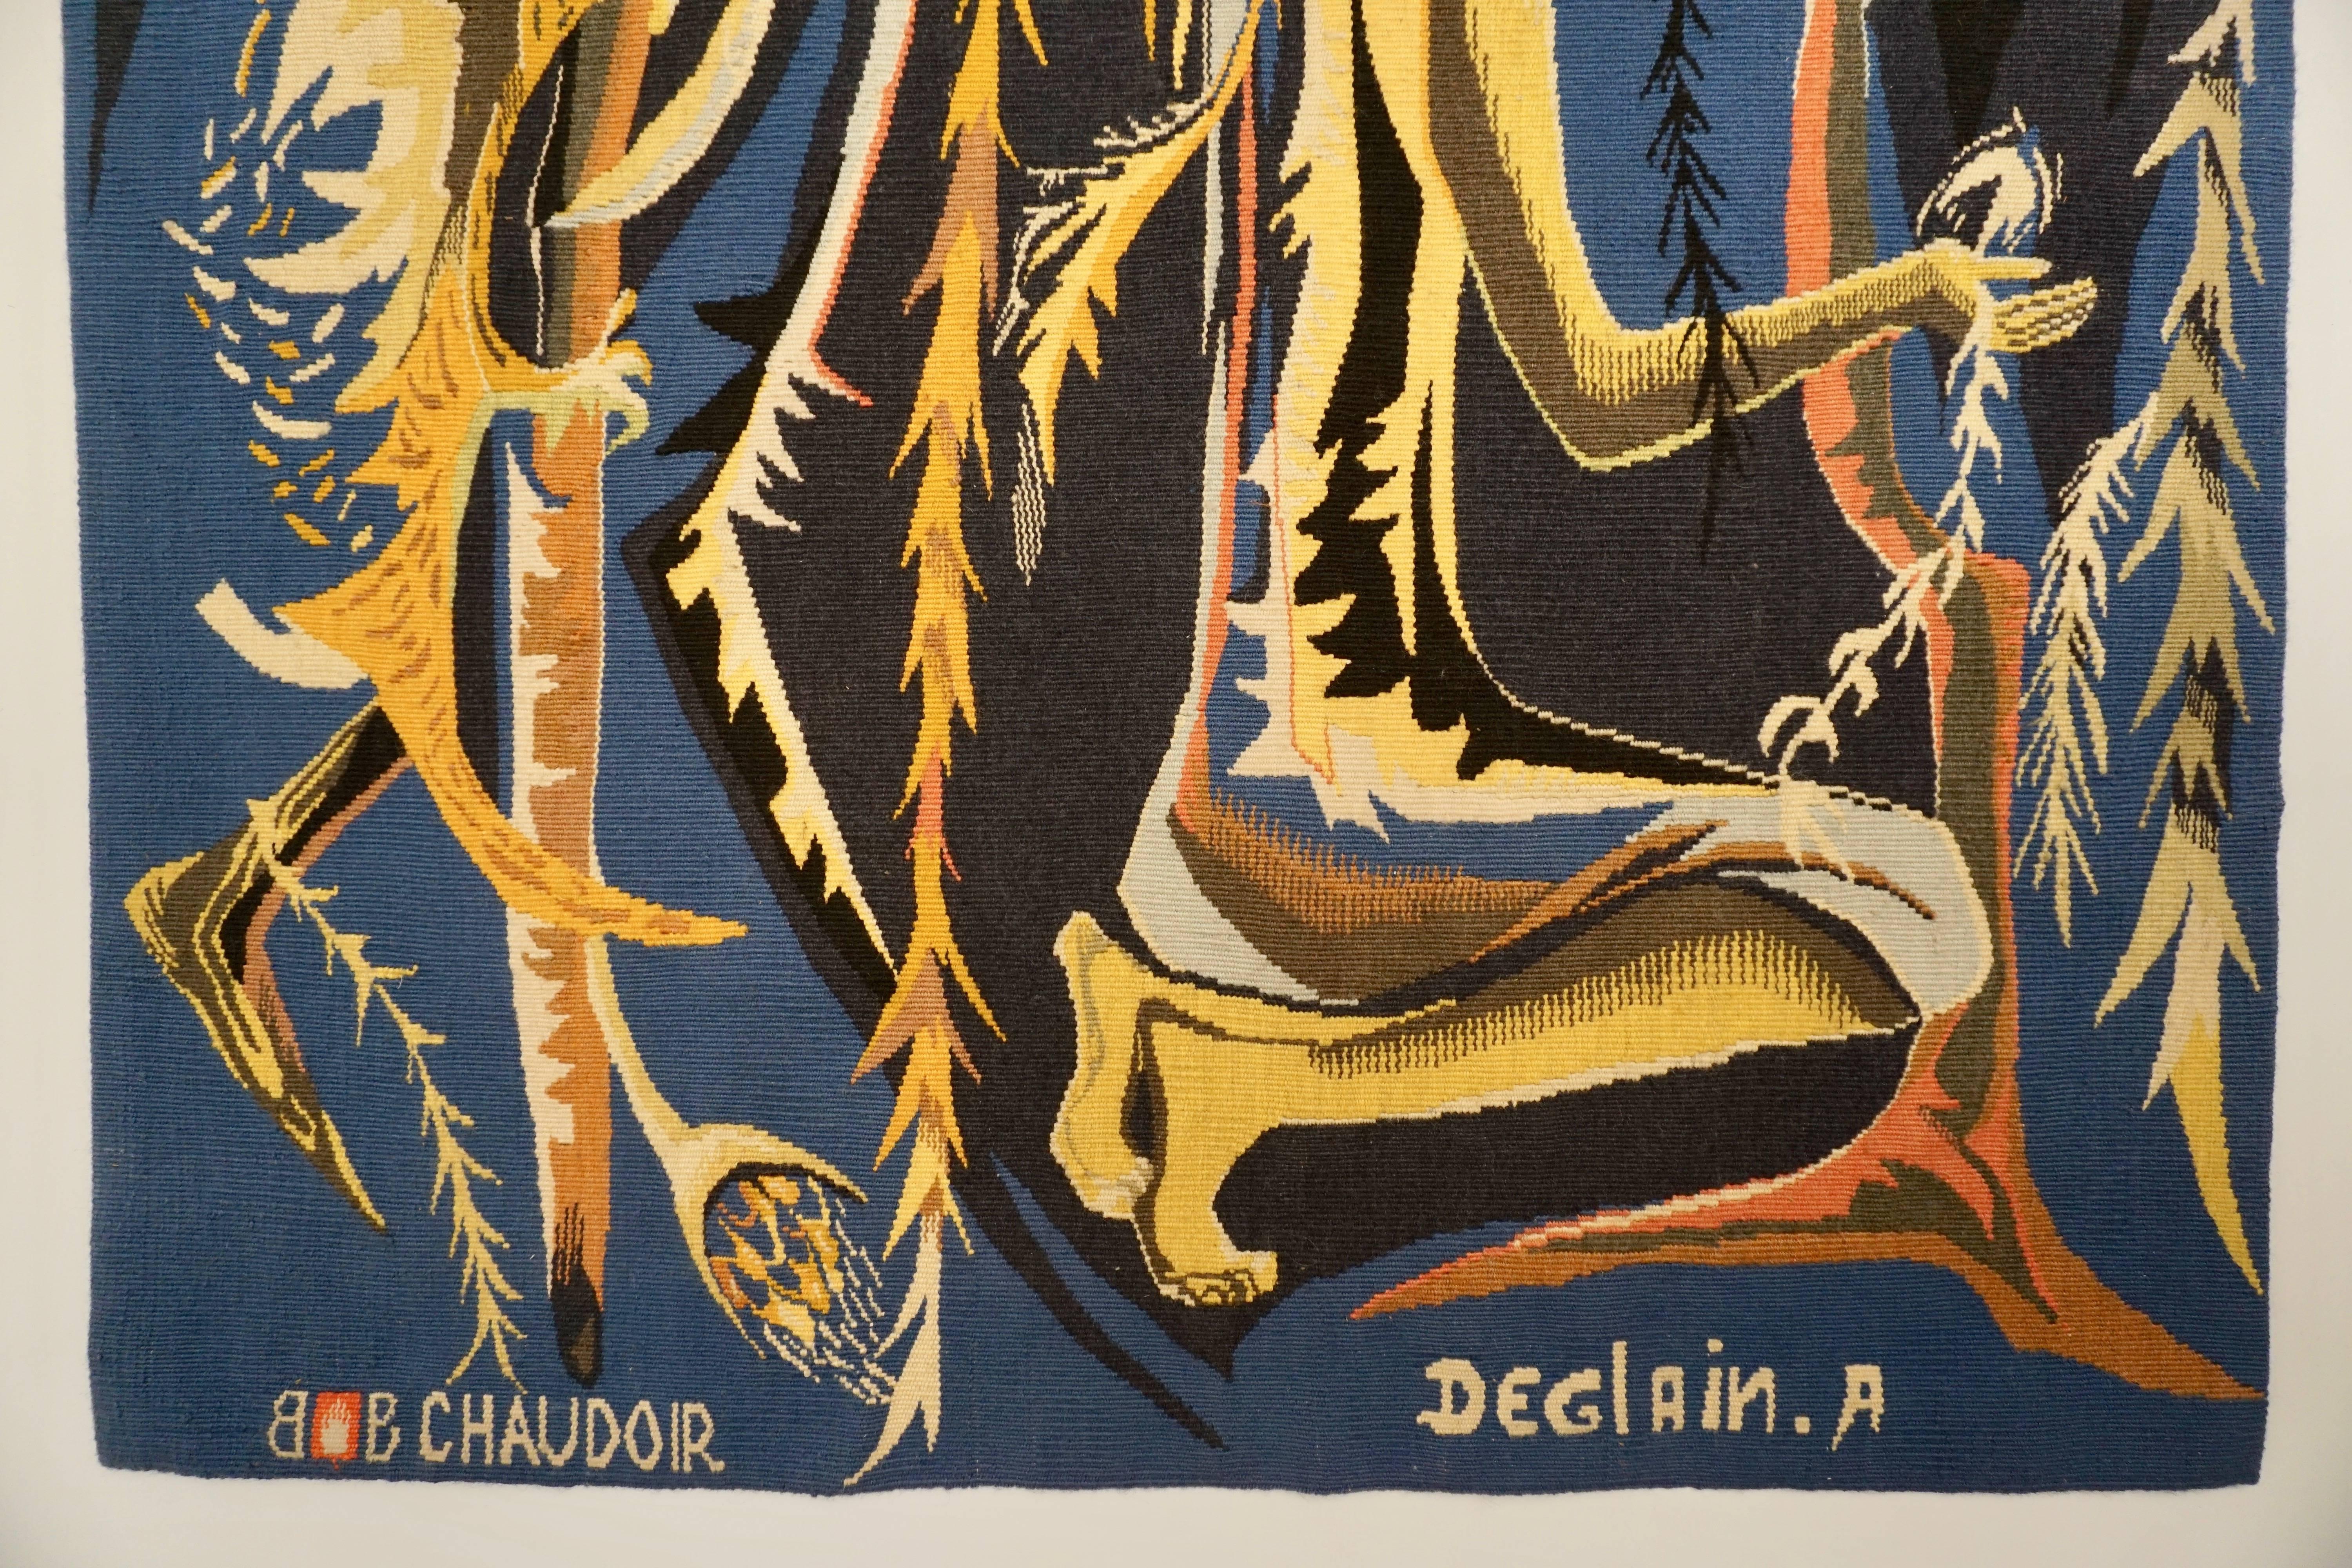 French Wool Tapestry by A Deglain, BB Chaudoir